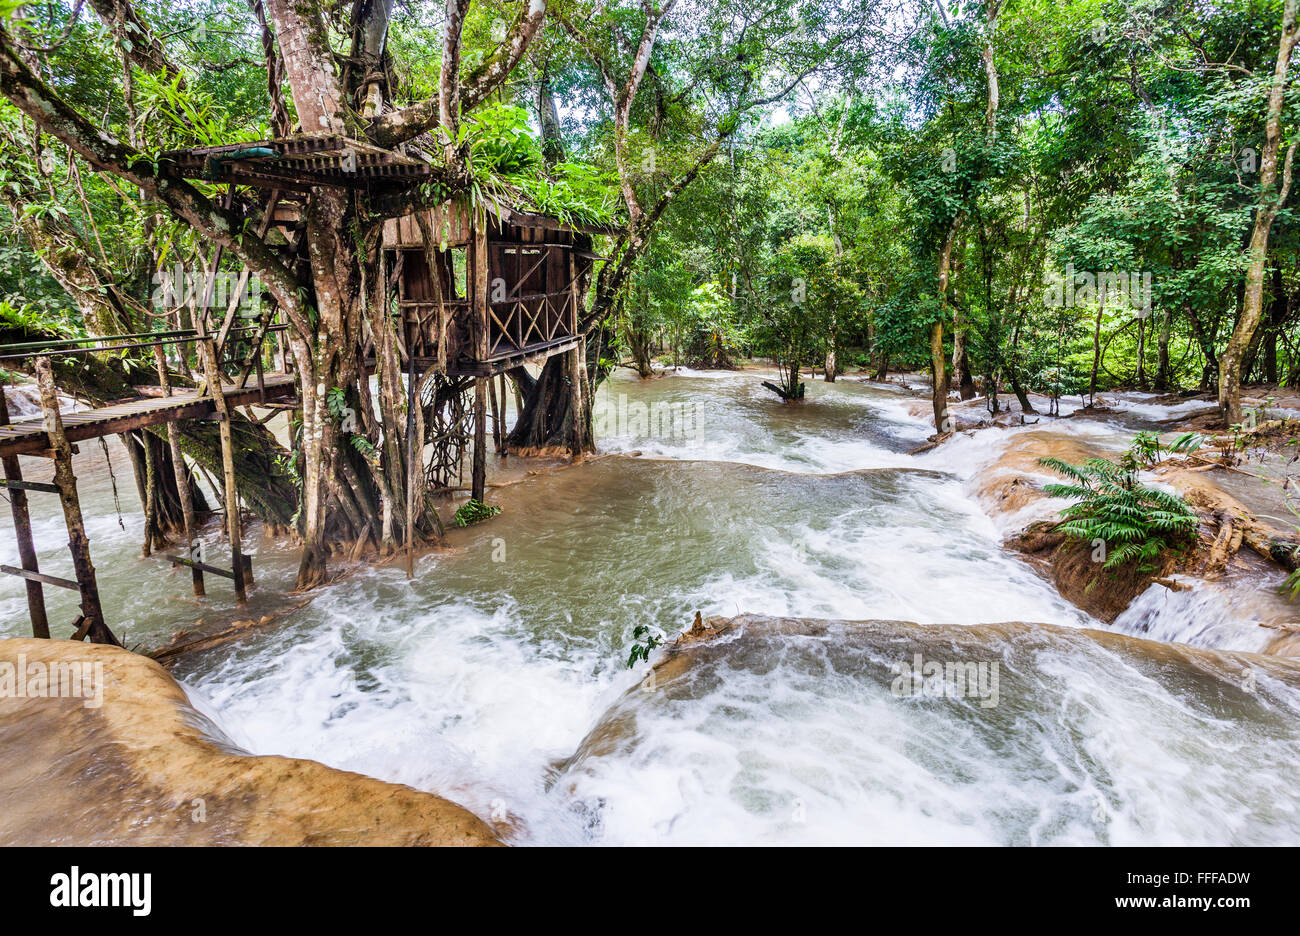 Lao People's Democratic Republic, Luang Prabang Province, Tat Sae Waterfalls cascading over limestone formations Stock Photo